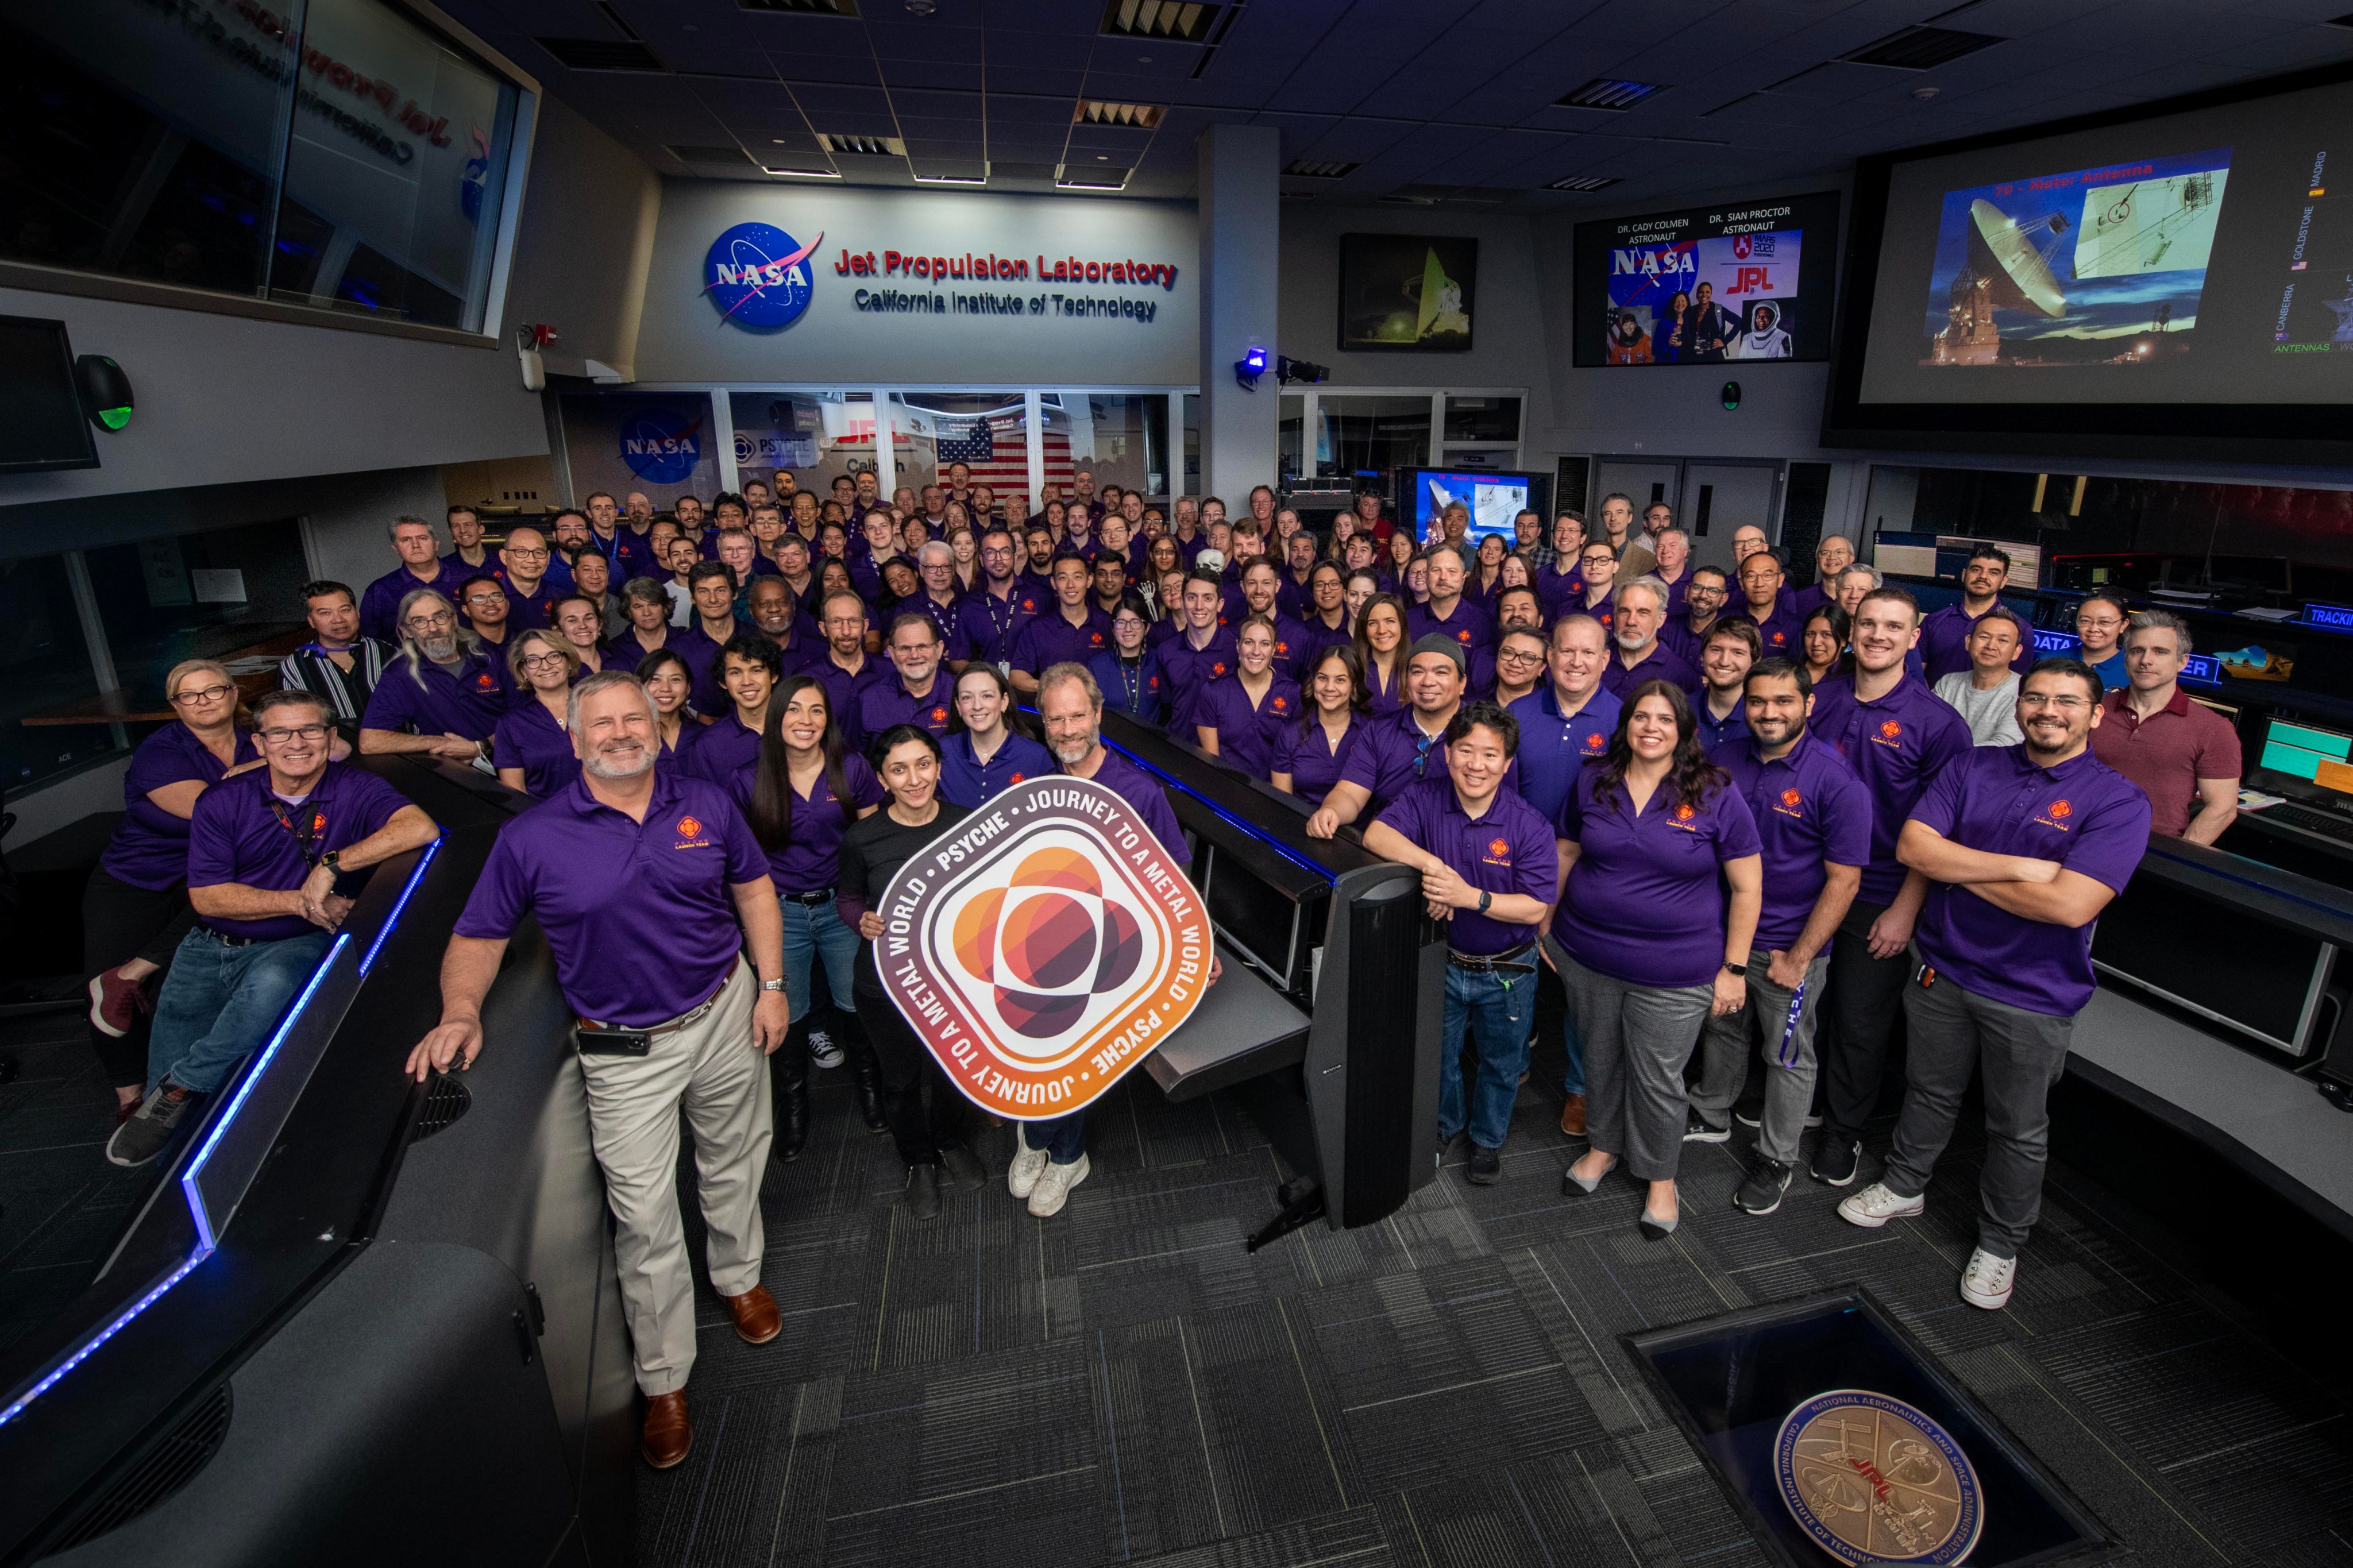 People wearing purple Psyche mission shirts pose for a photo.